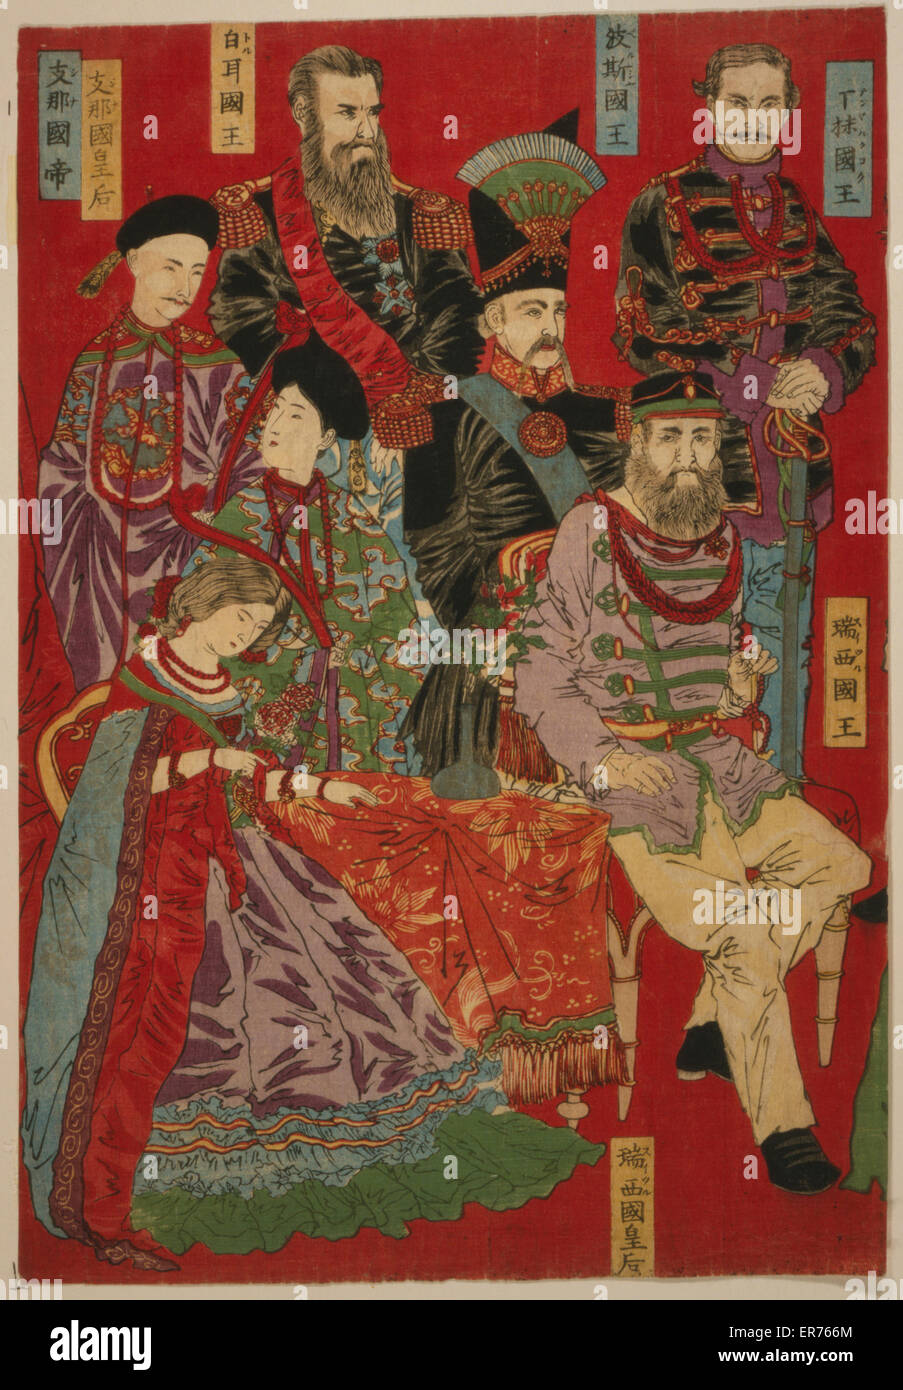 Portrait of world sovereigns. Two sections of a Japanese triptych print showing seated and standing world leaders gathered in a group. Date 1879. Stock Photo